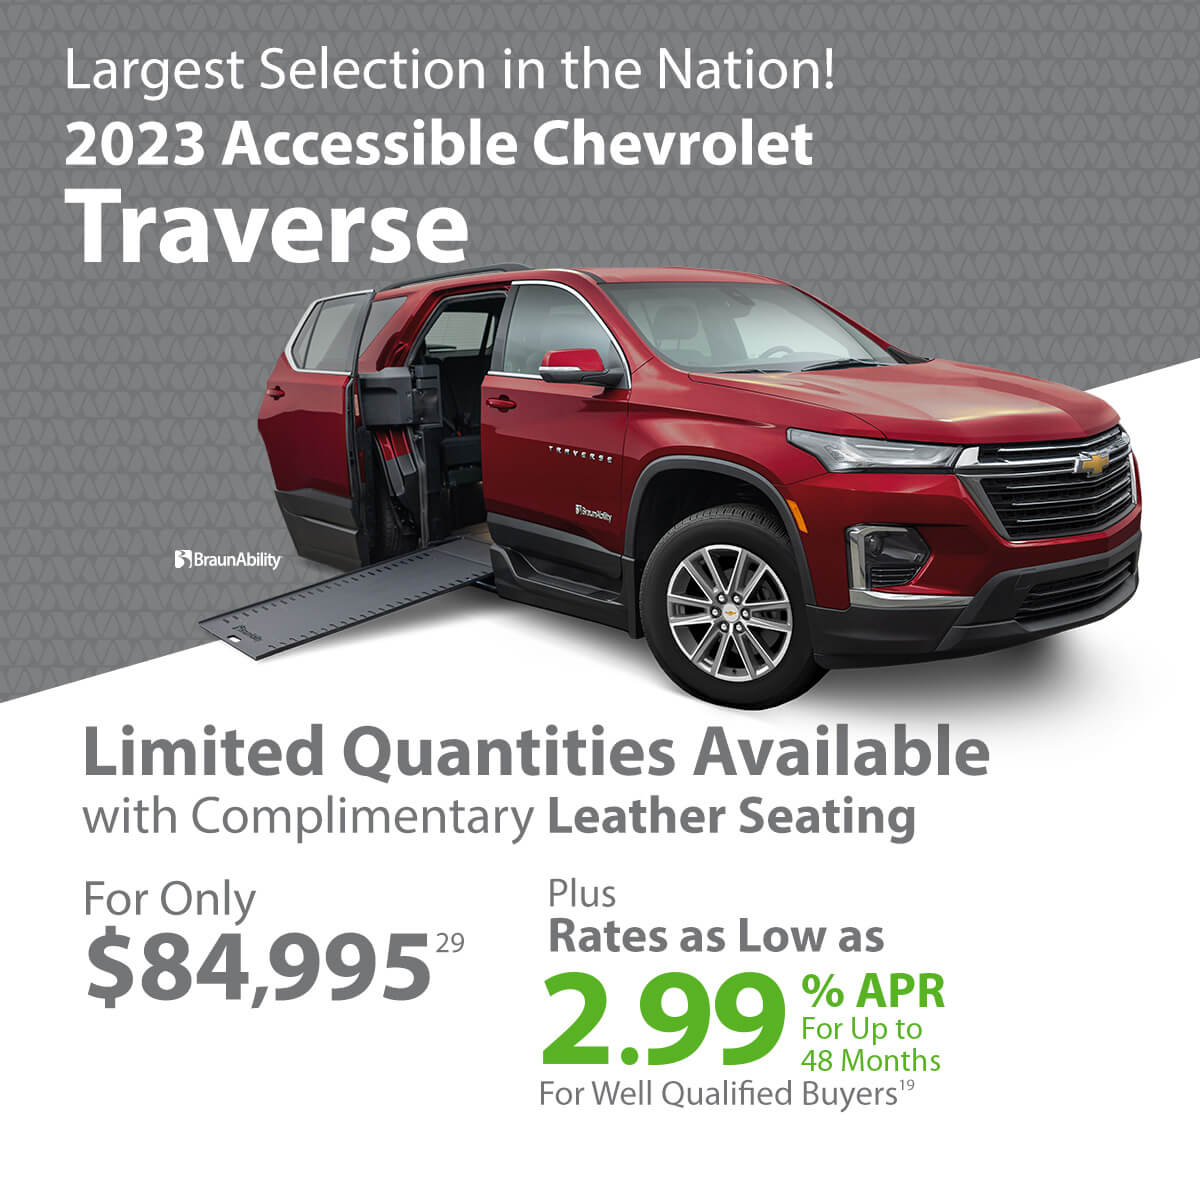 BraunAbility's conversion on the 2023 Chevy Traverse now has special 2.99% APR financing.